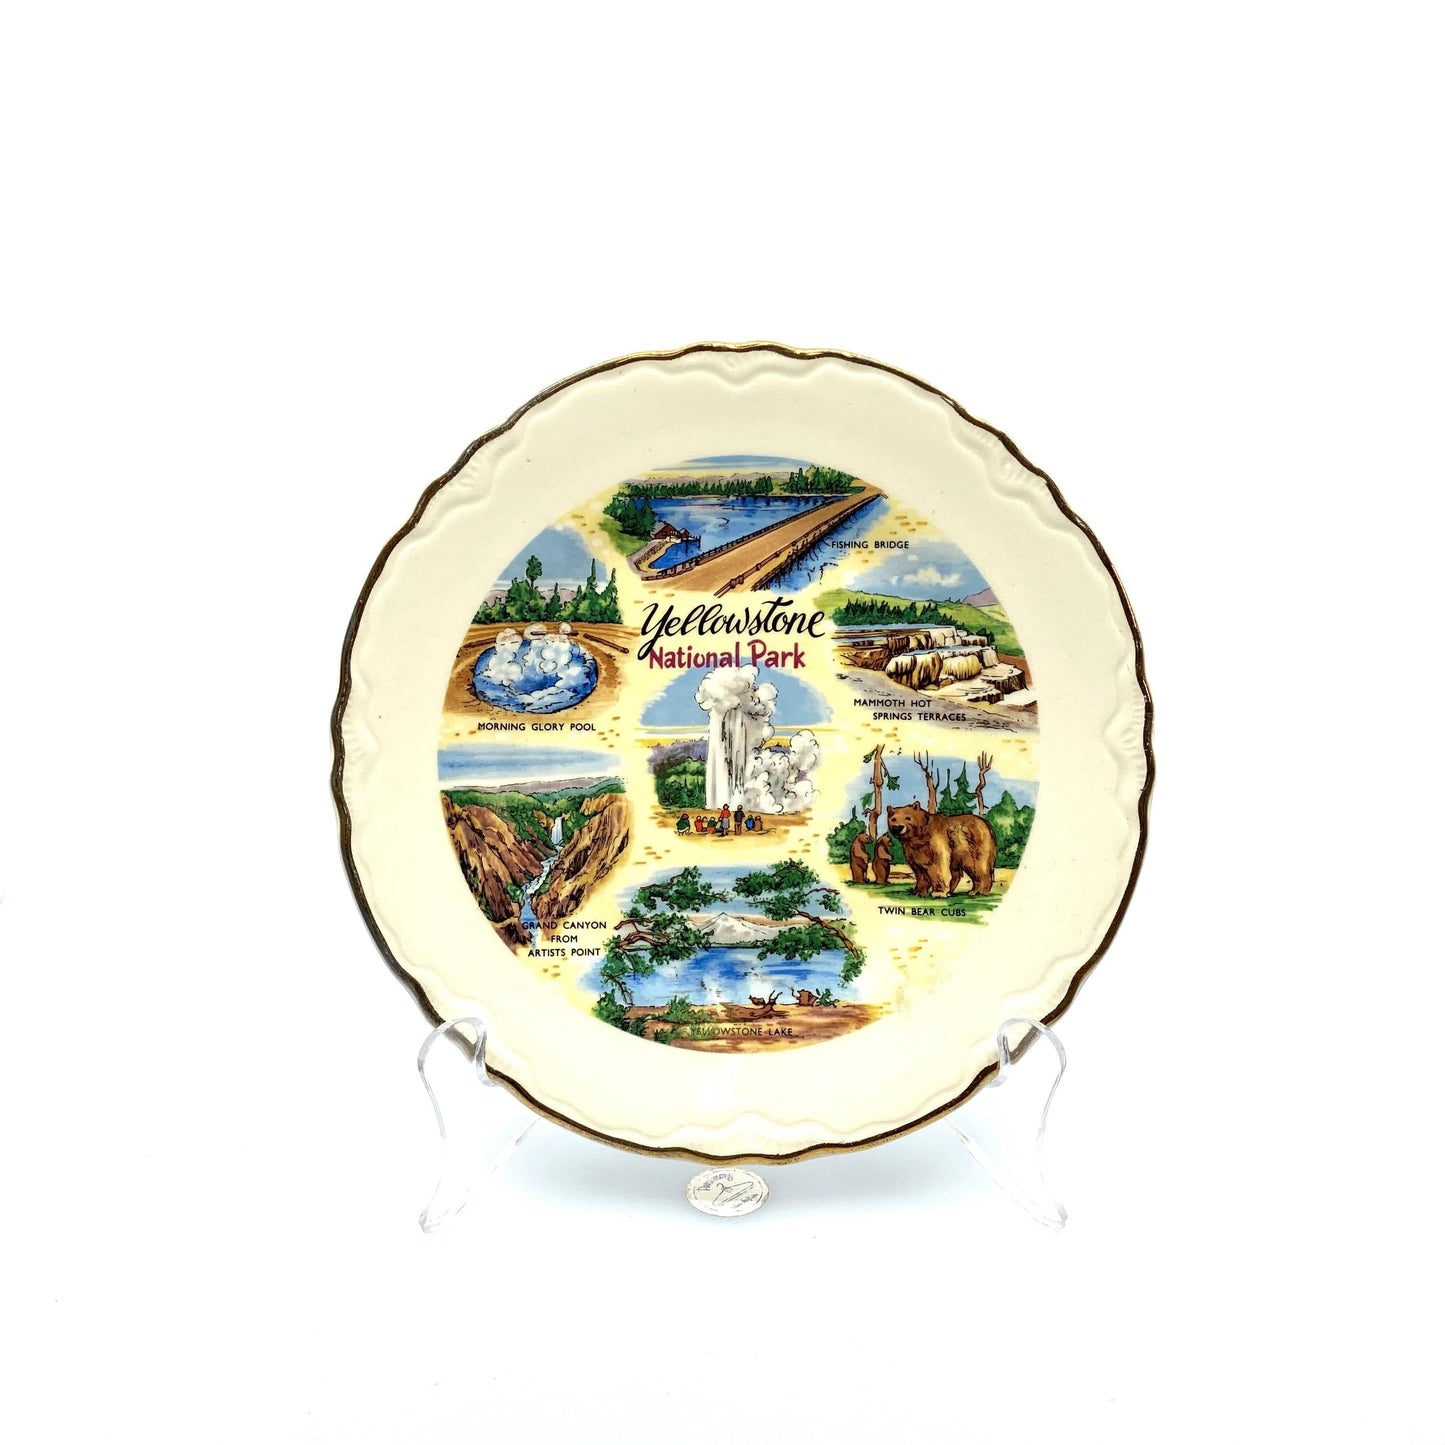 Vintage State Souvenir Plate “Yellowstone National Park” Collectible, White - 7.5”